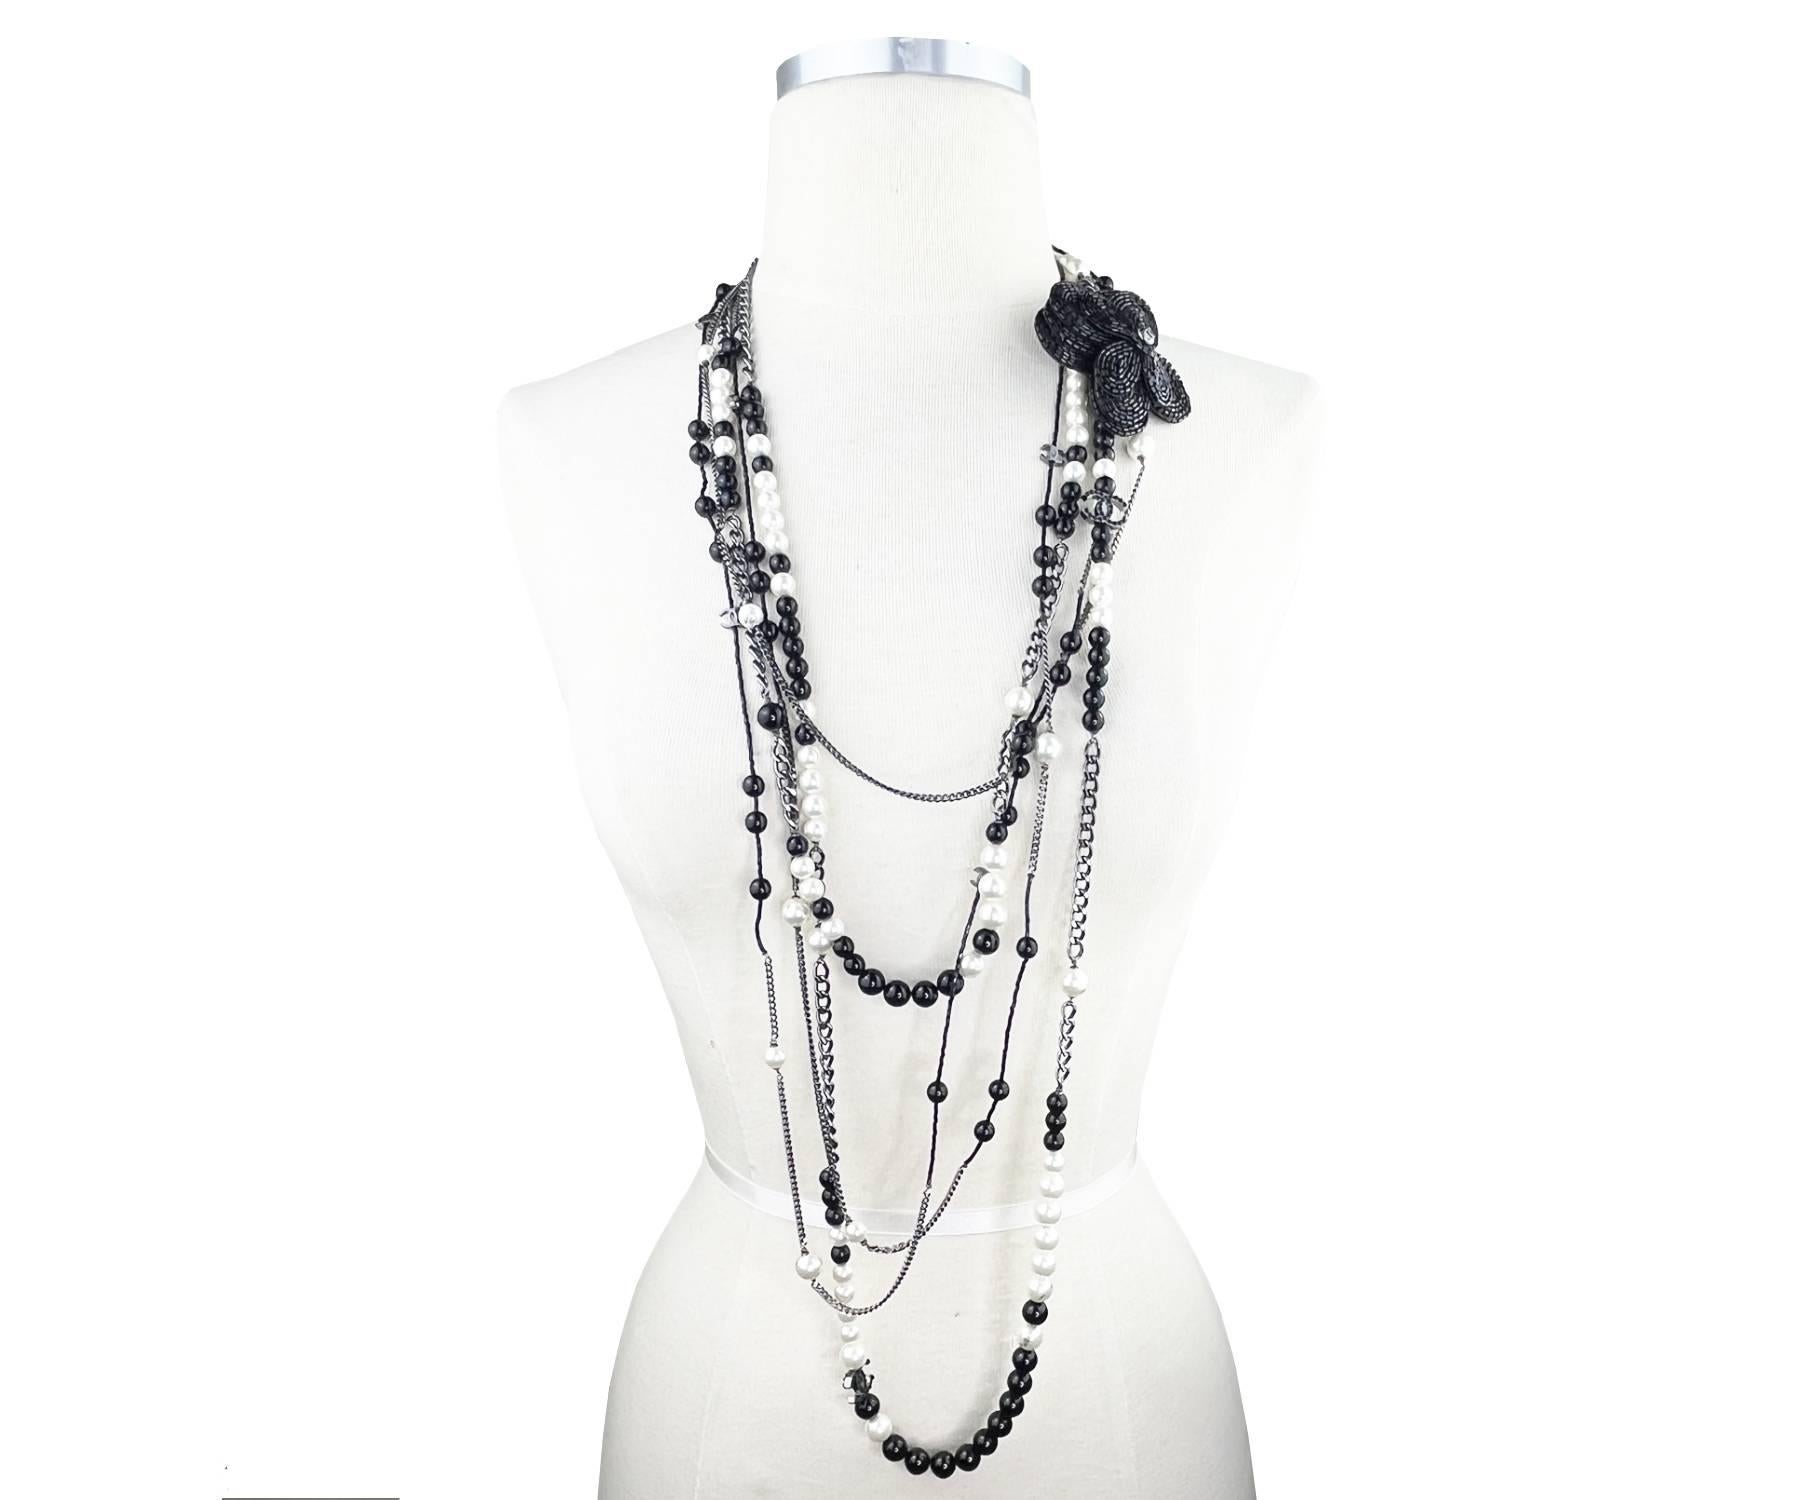 Chanel Black CC Beaded Flower Pin Black Bead Pearl 5 Strand Necklace

*Marked 03
*Made in France
*Comes with original box

-Approximately 46″ long
-The beaded flower brooch is approximately 3″ x 3″. It can’t be removed.
-Very classic and pretty
– In